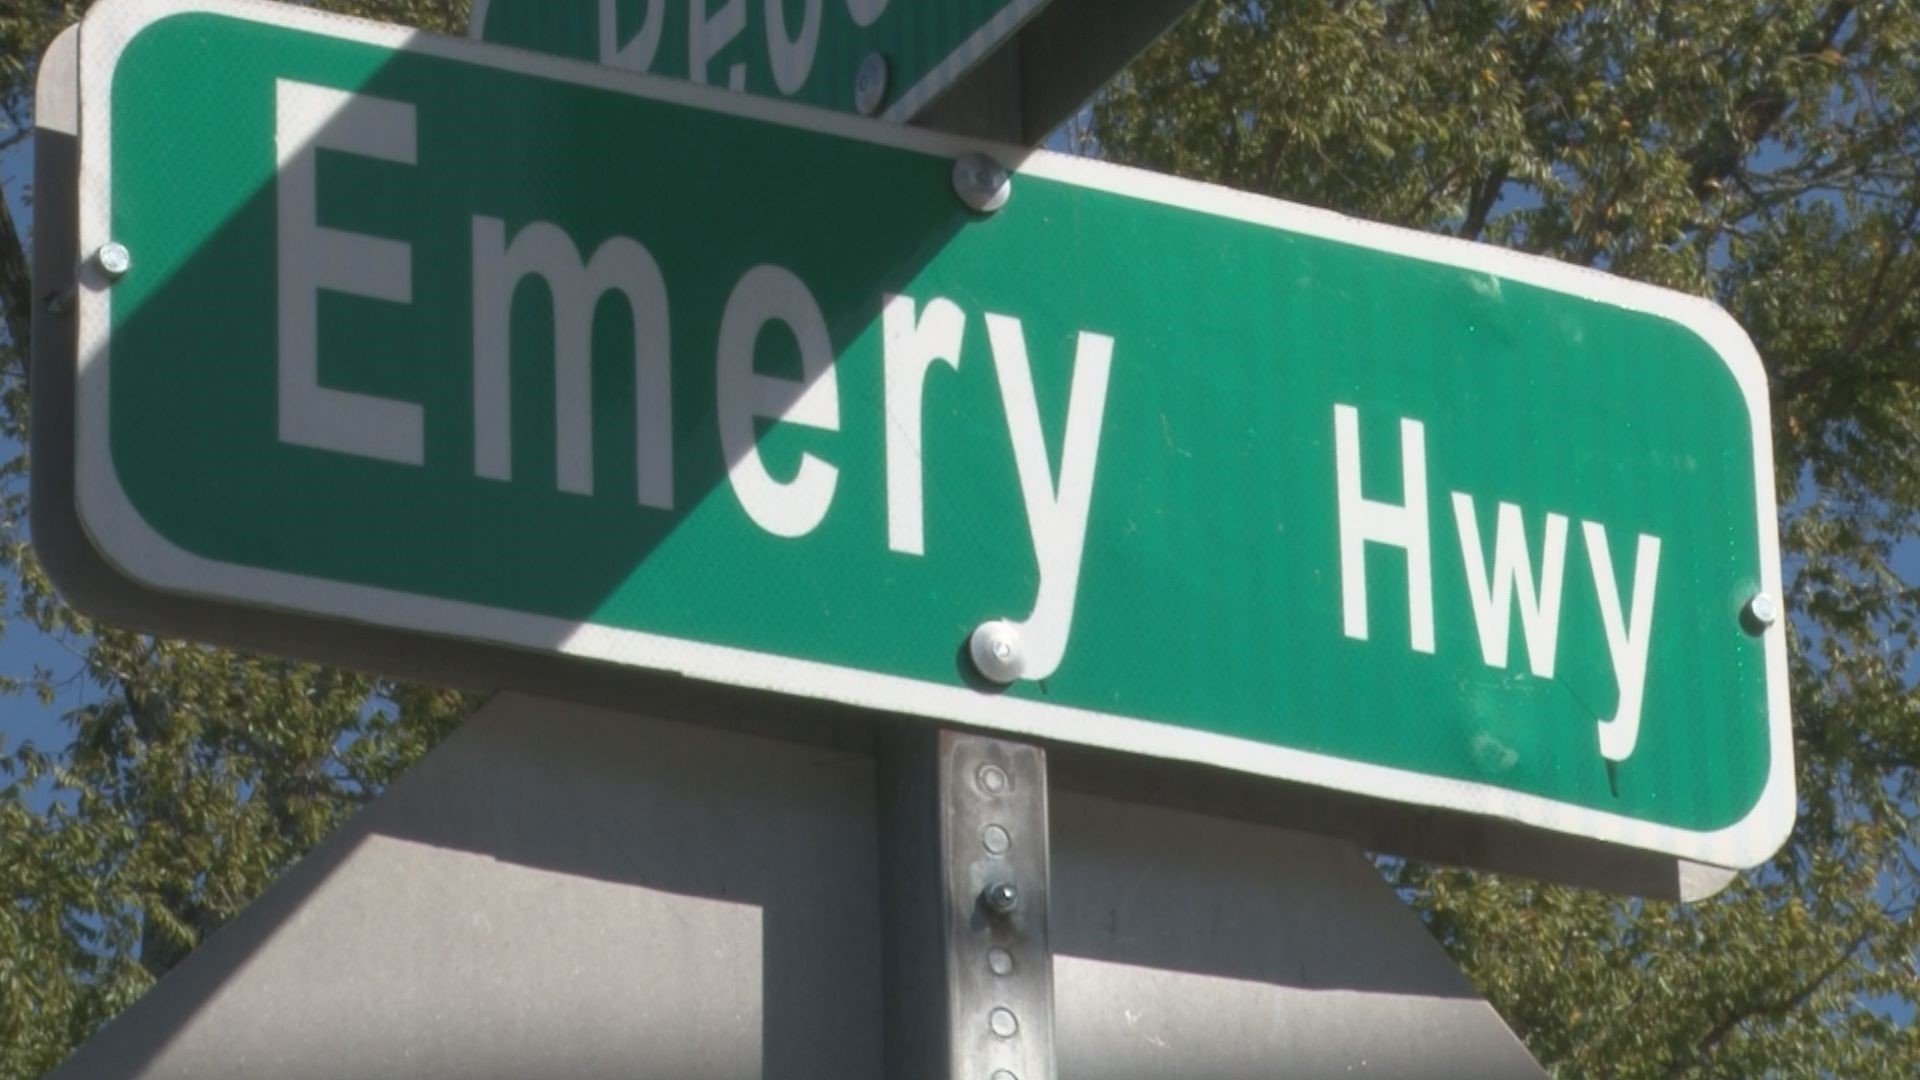 13WMAZ is kicking off our Driving Me Crazy series with a Macon man asking the Georgia Department of Transportation to repave Emery Highway